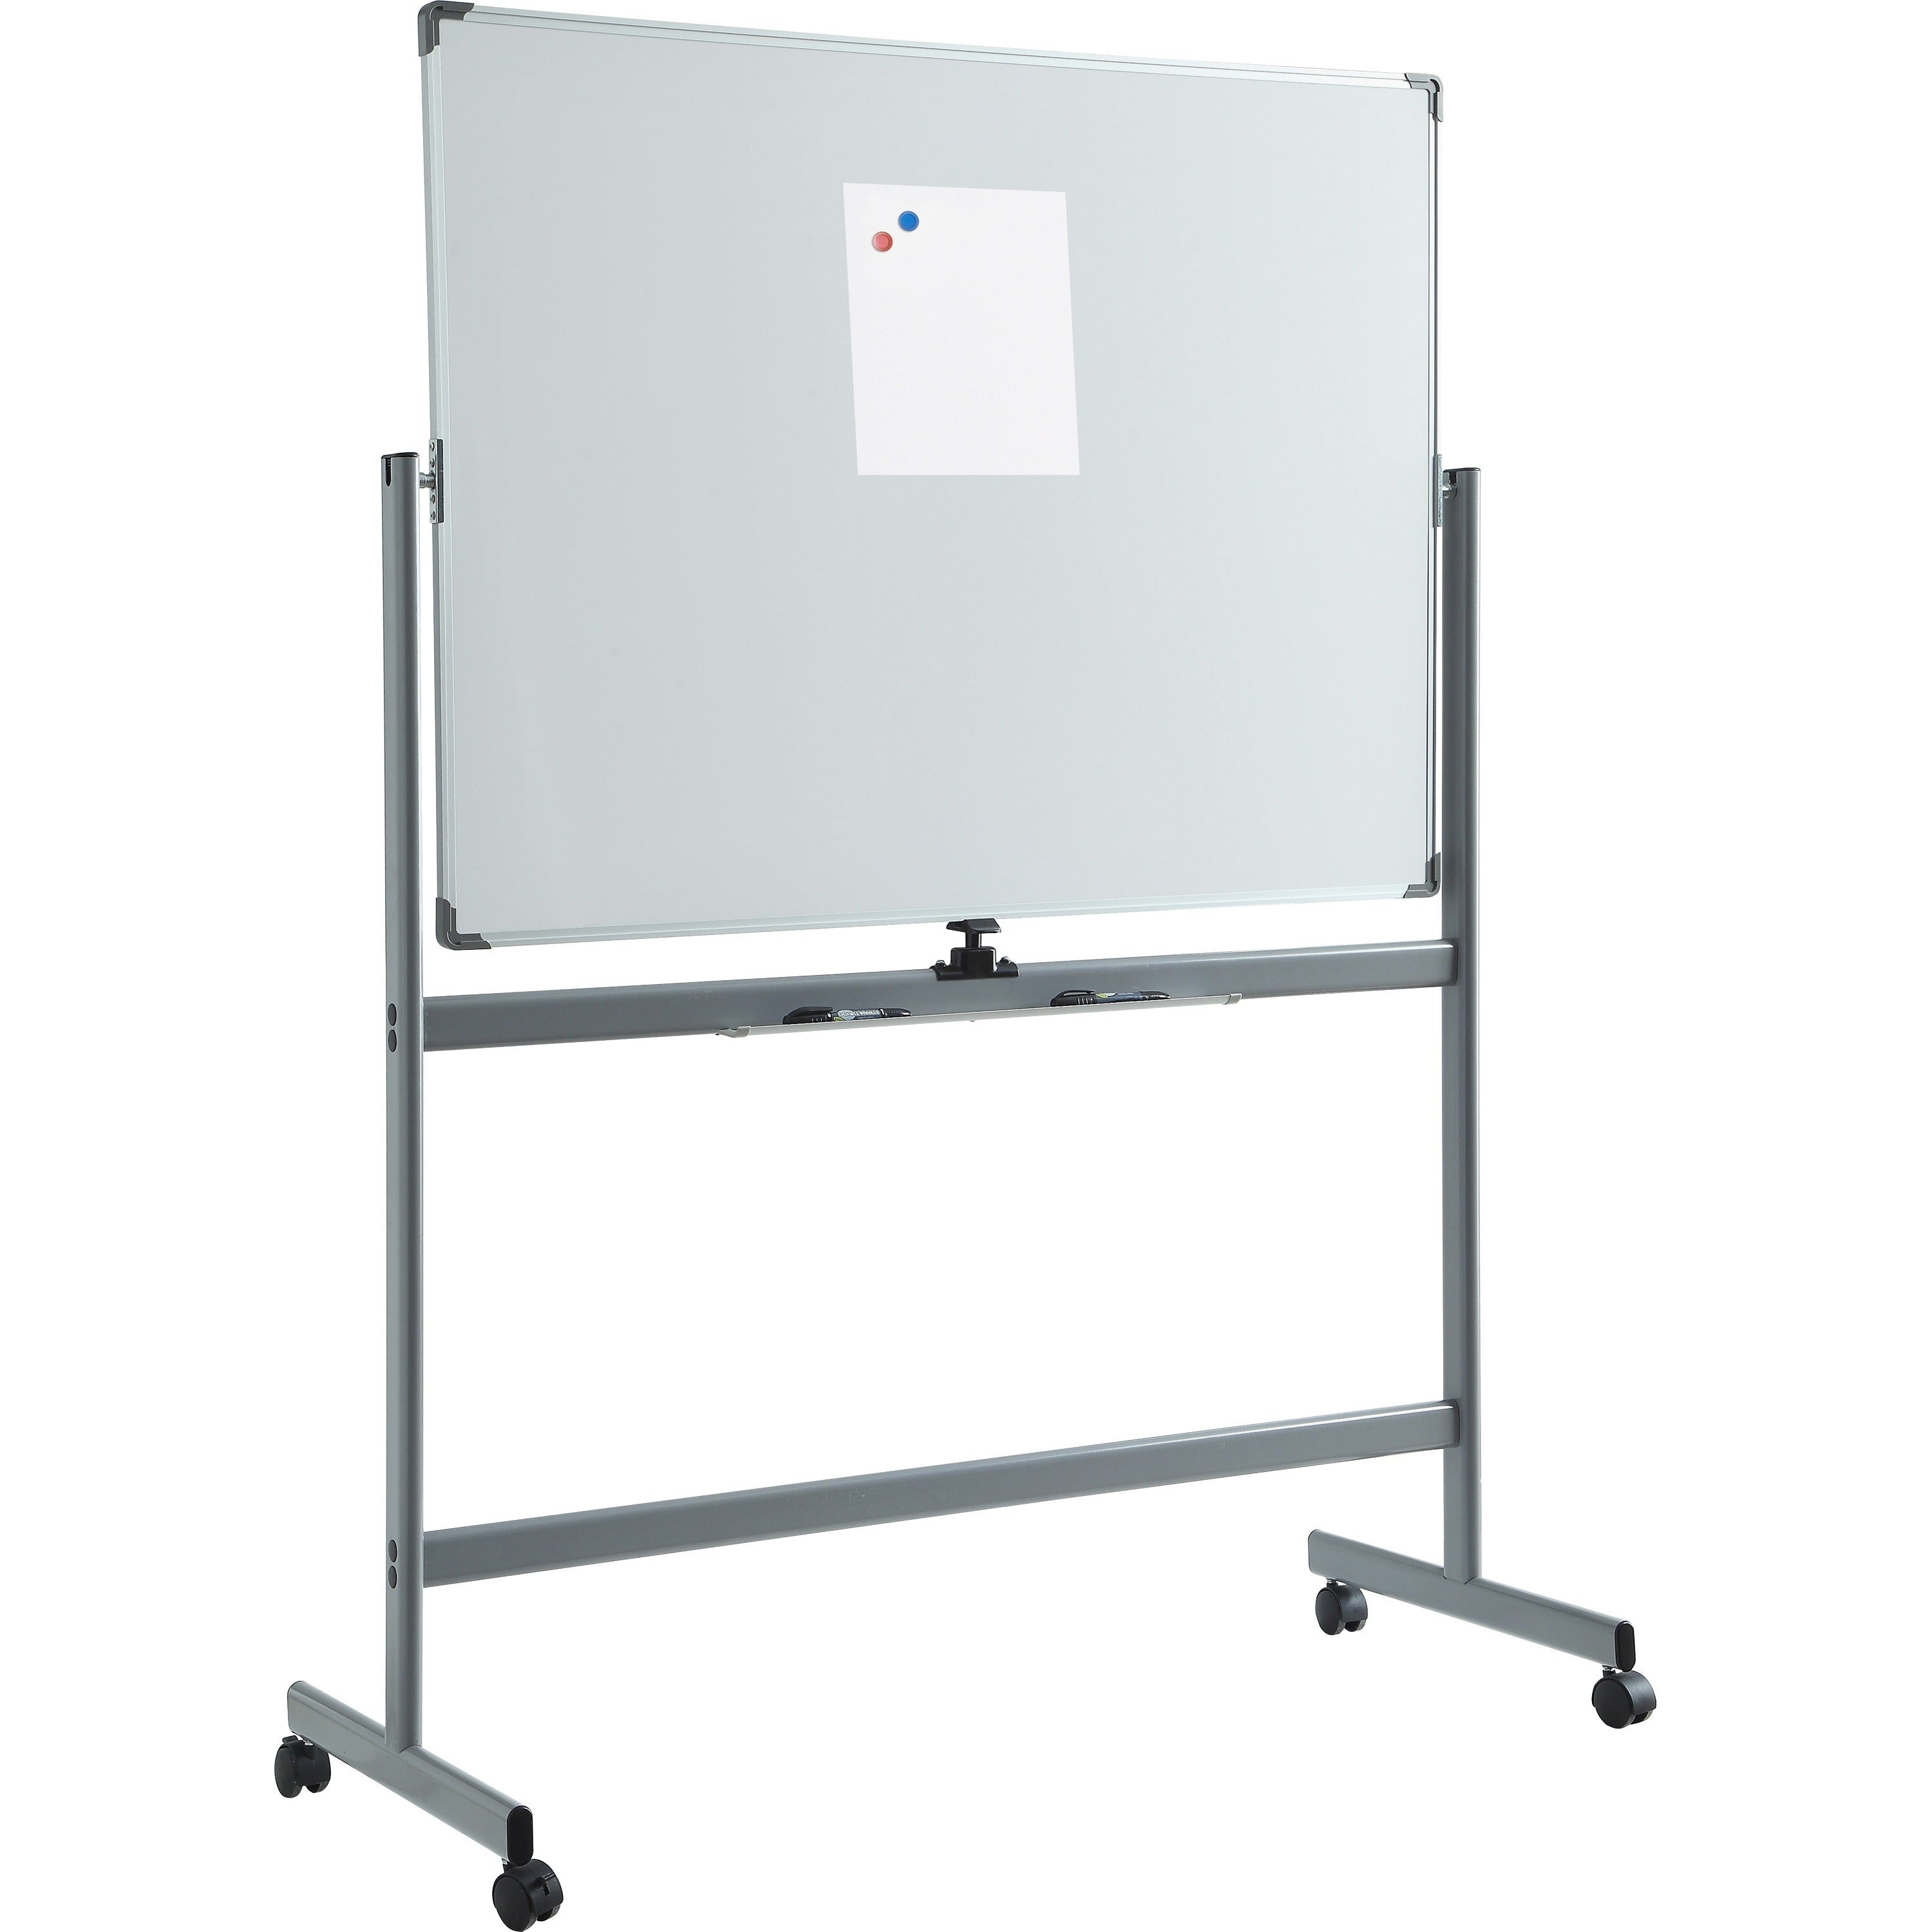 lorell-double-sided-magnetic-whiteboard-easel-72-6-ft-width-x-48-4-ft-height-white-surface-rectangle-floor-standing-magnetic-1-each_llr52569 - 3